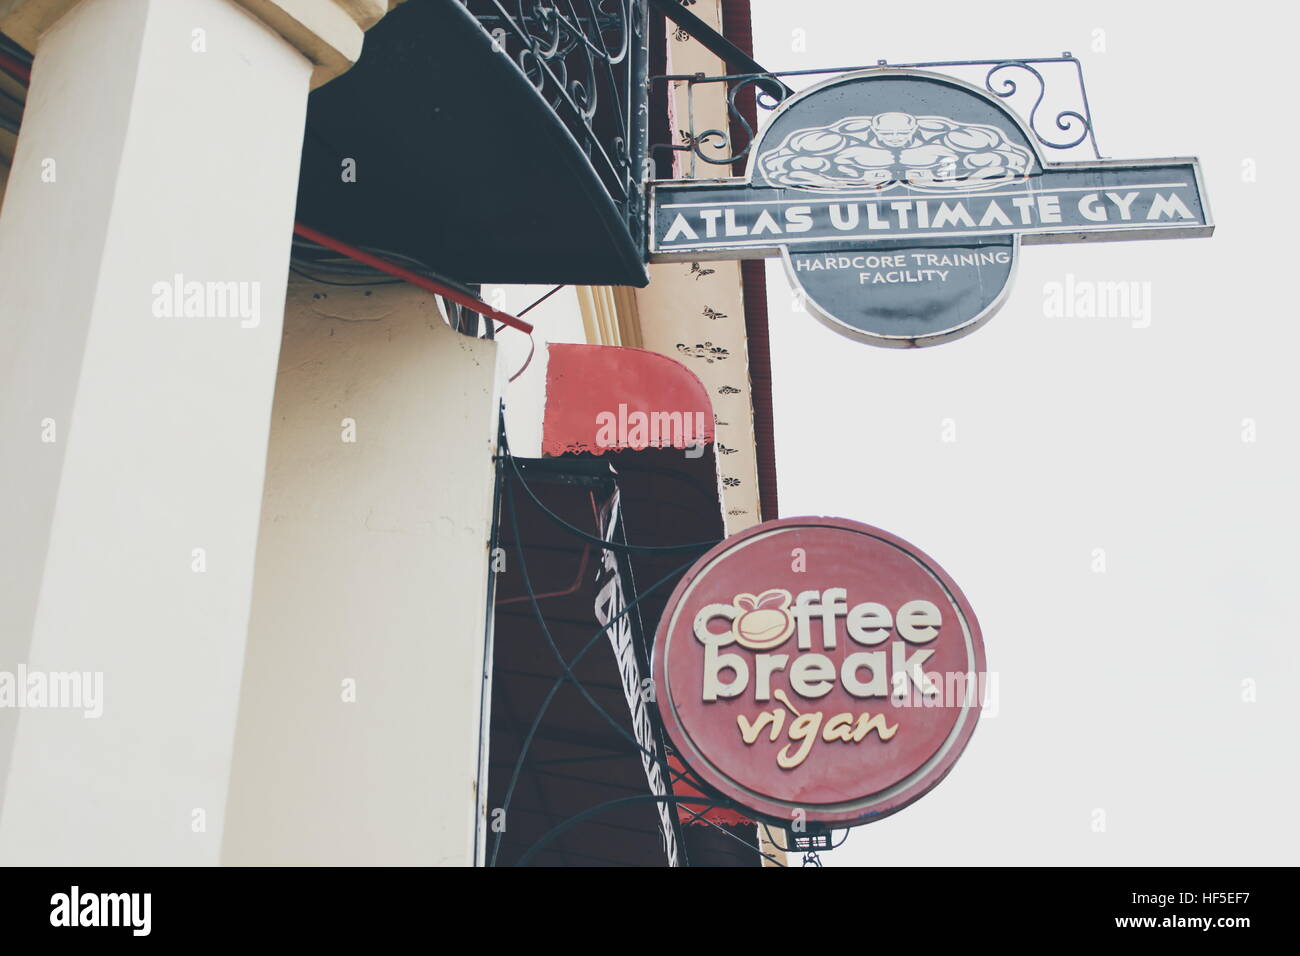 Coffee and gym in Ilocos Vigan Stock Photo